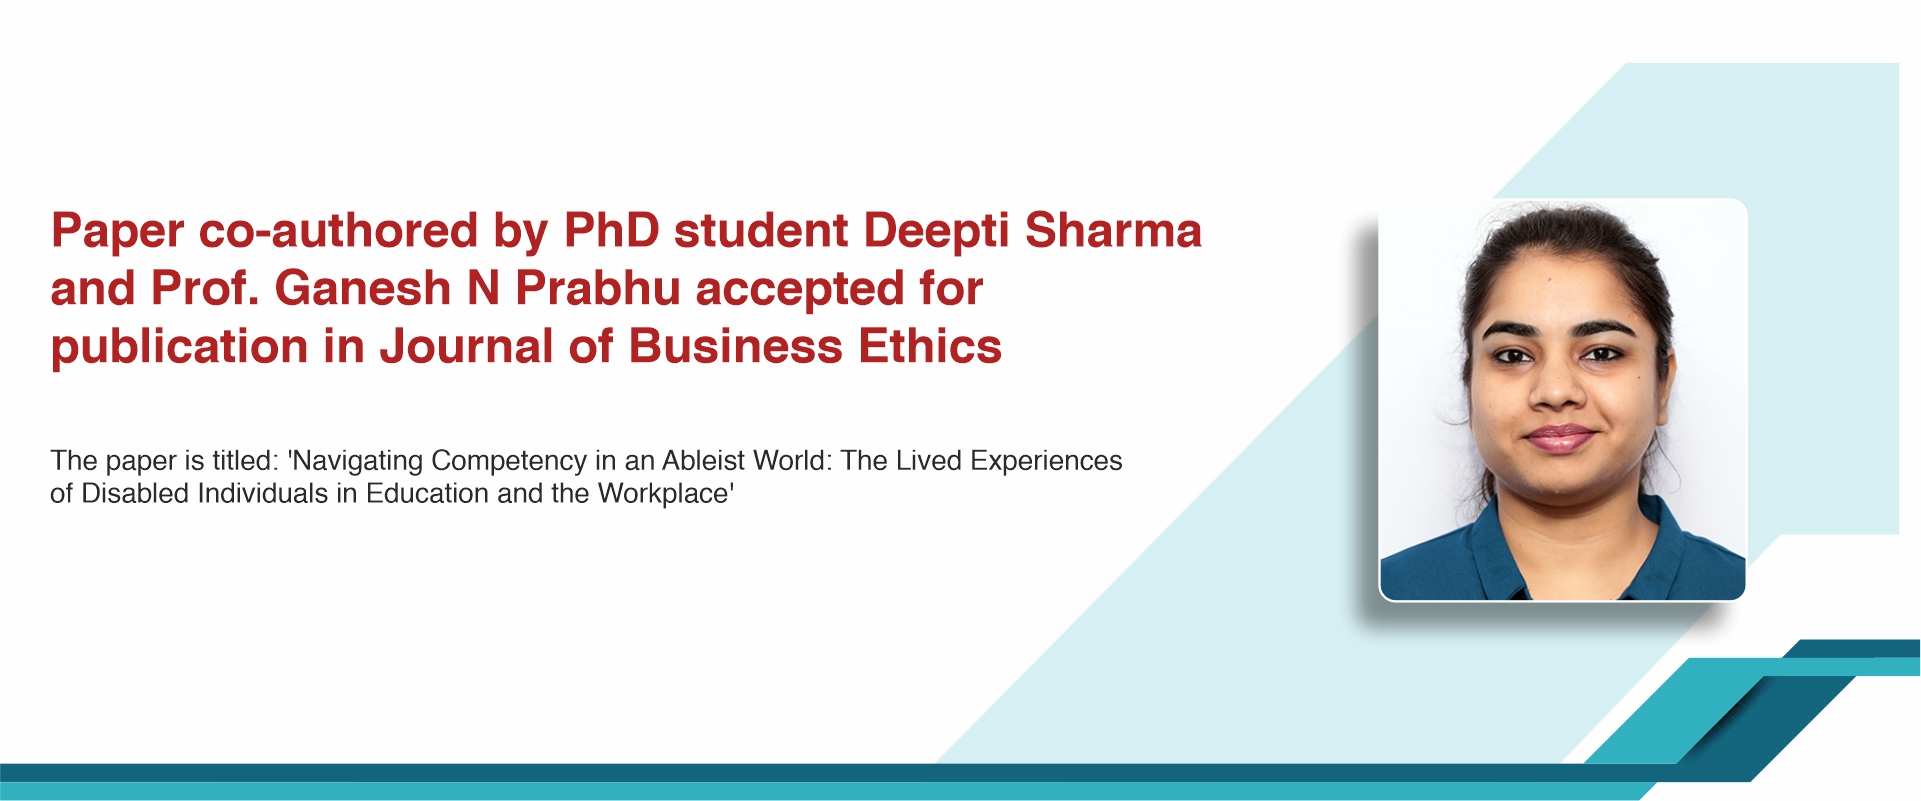 Paper co-authored by PhD student Deepti Sharma and Prof. Ganesh N Prabhu accepted for publication in Journal of Business Ethics